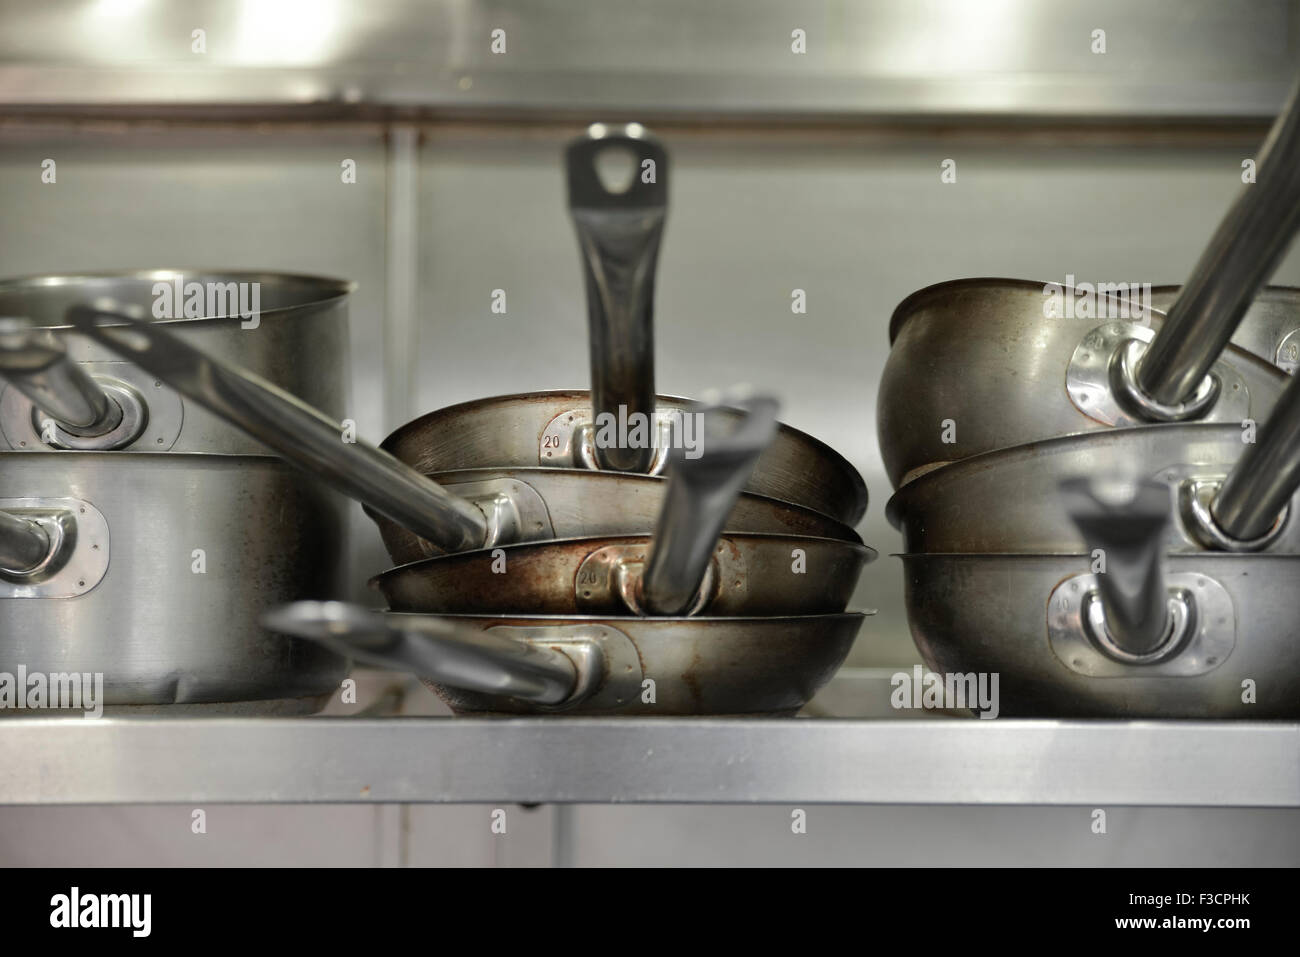 19,500+ Pots And Pans Stacked Stock Photos, Pictures & Royalty